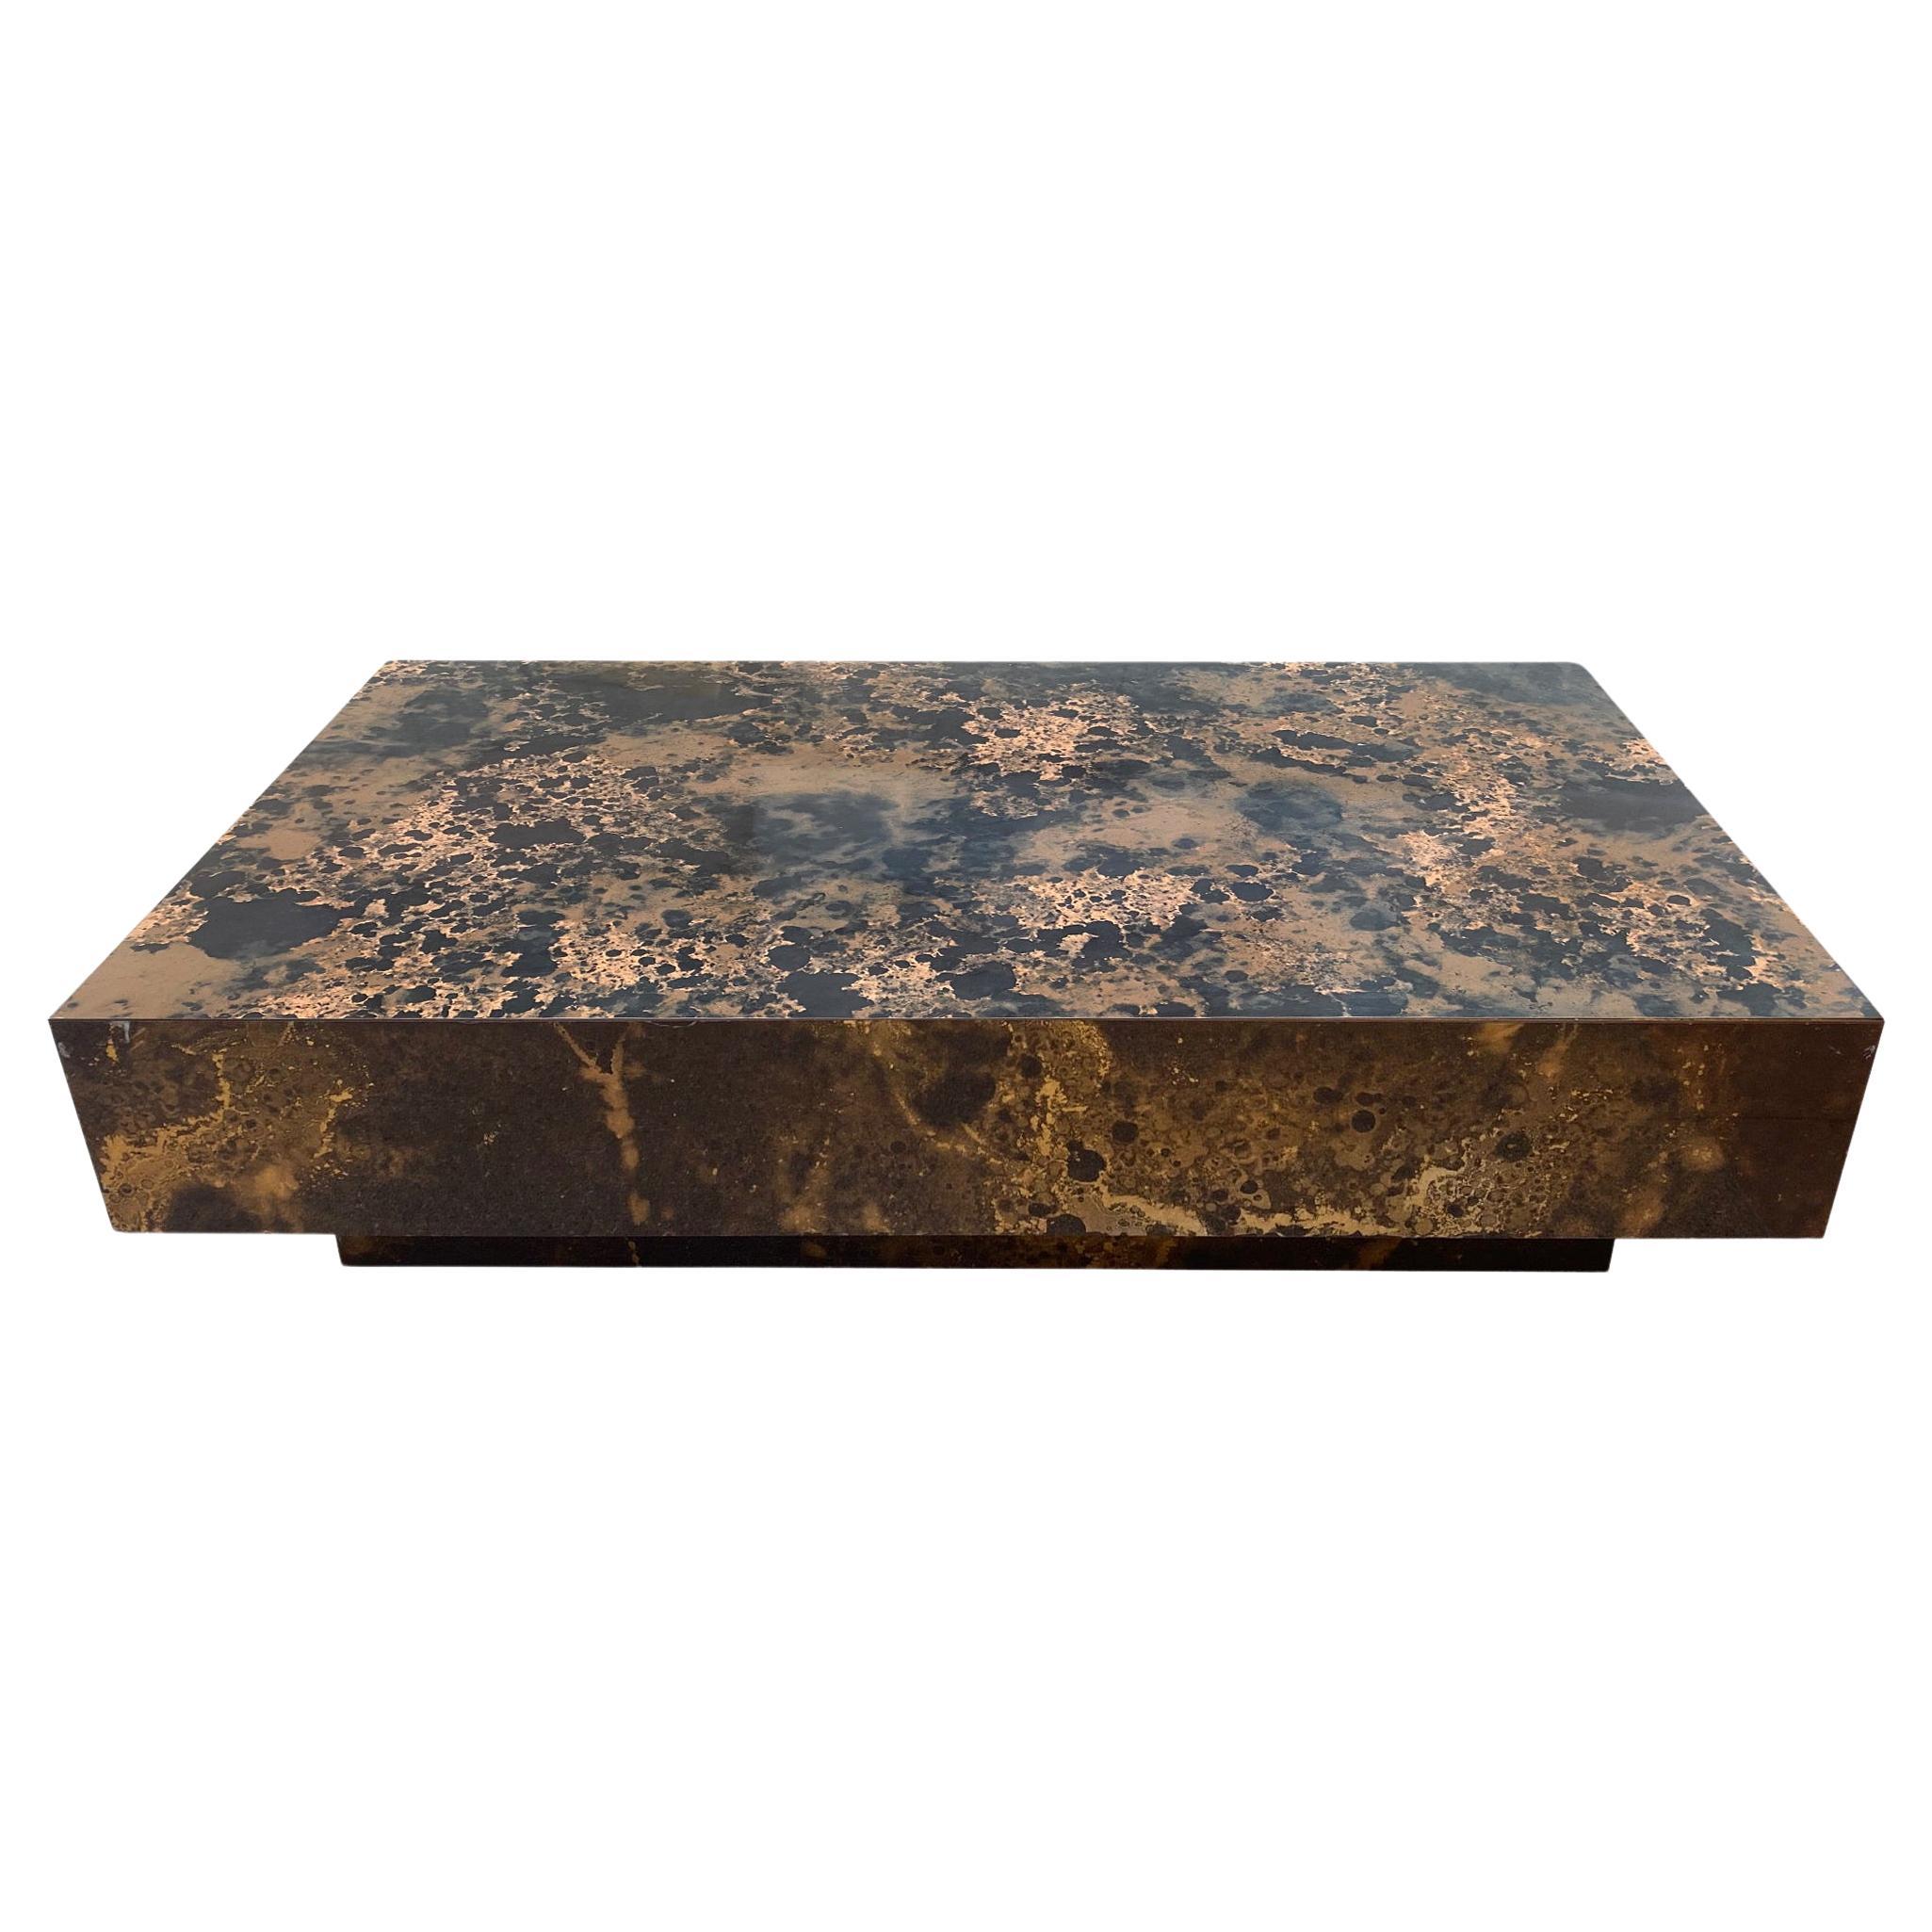 Guy lefevre For Roche Bobois  Solar flare coffee table  Wood/ lacquered melamine For Sale